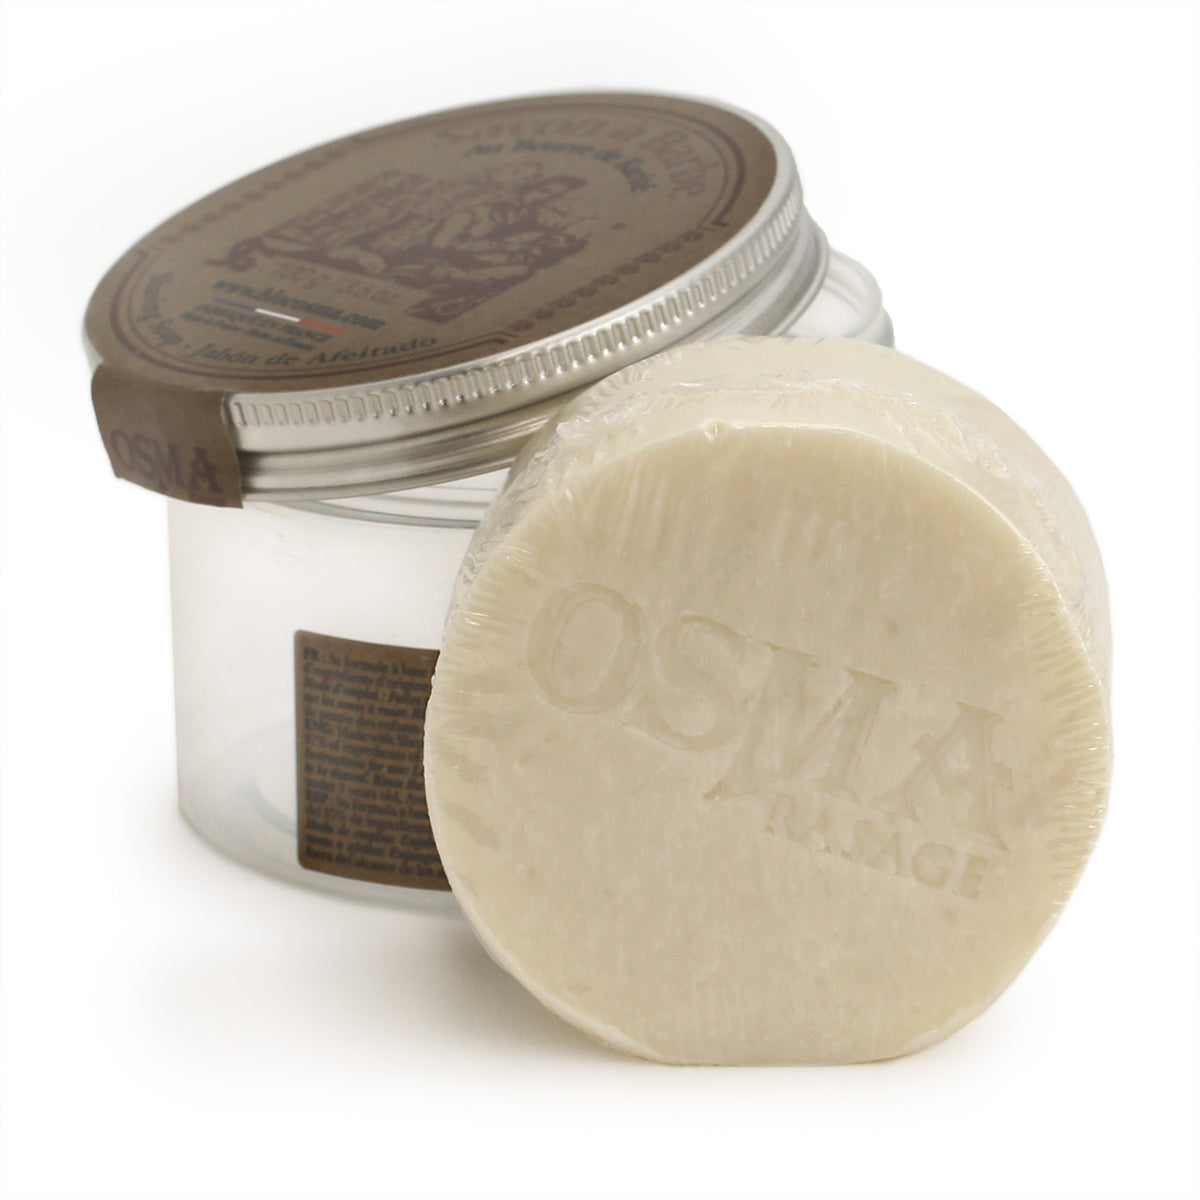 Osma Shave Soap puck with it&#39;s screw on lid container